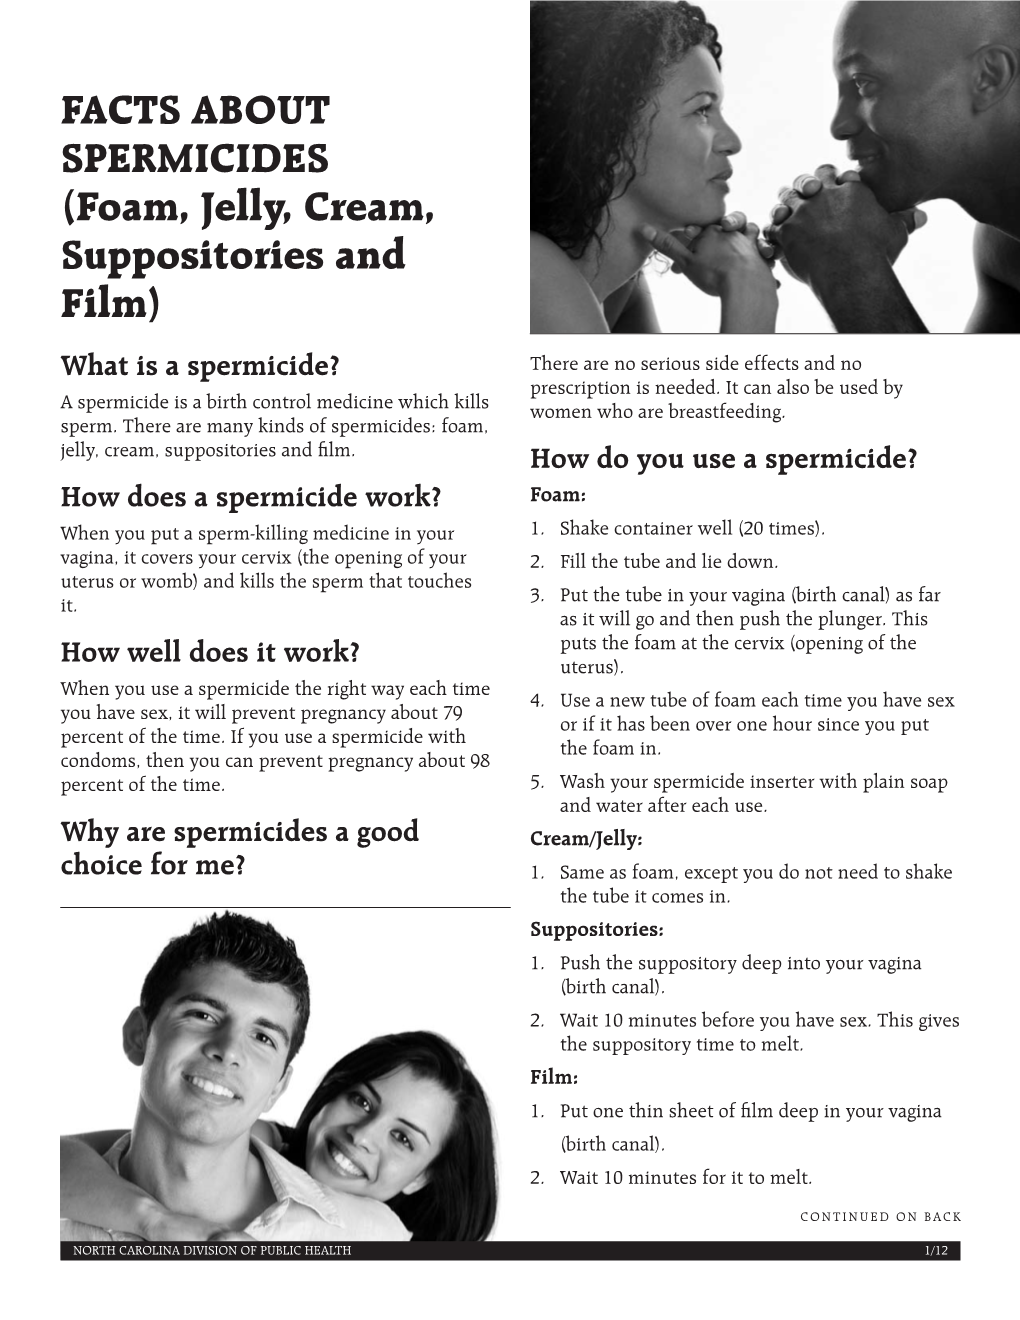 FACTS ABOUT SPERMICIDES (Foam, Jelly, Cream, Suppositories and Film)